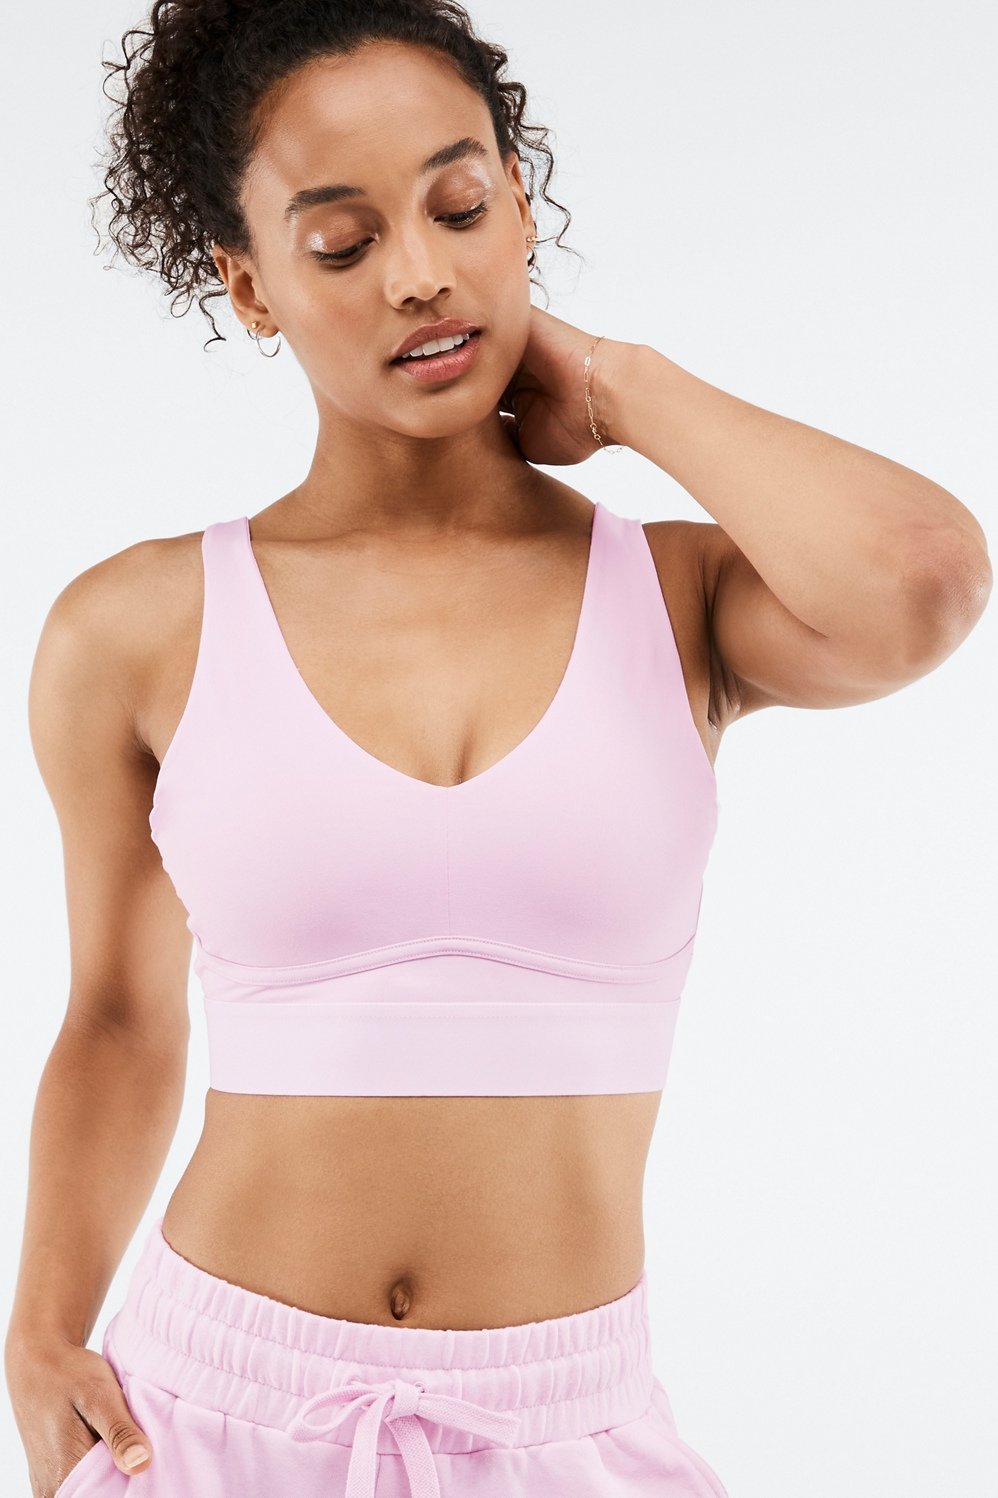  Image Courtesy of Fabletics